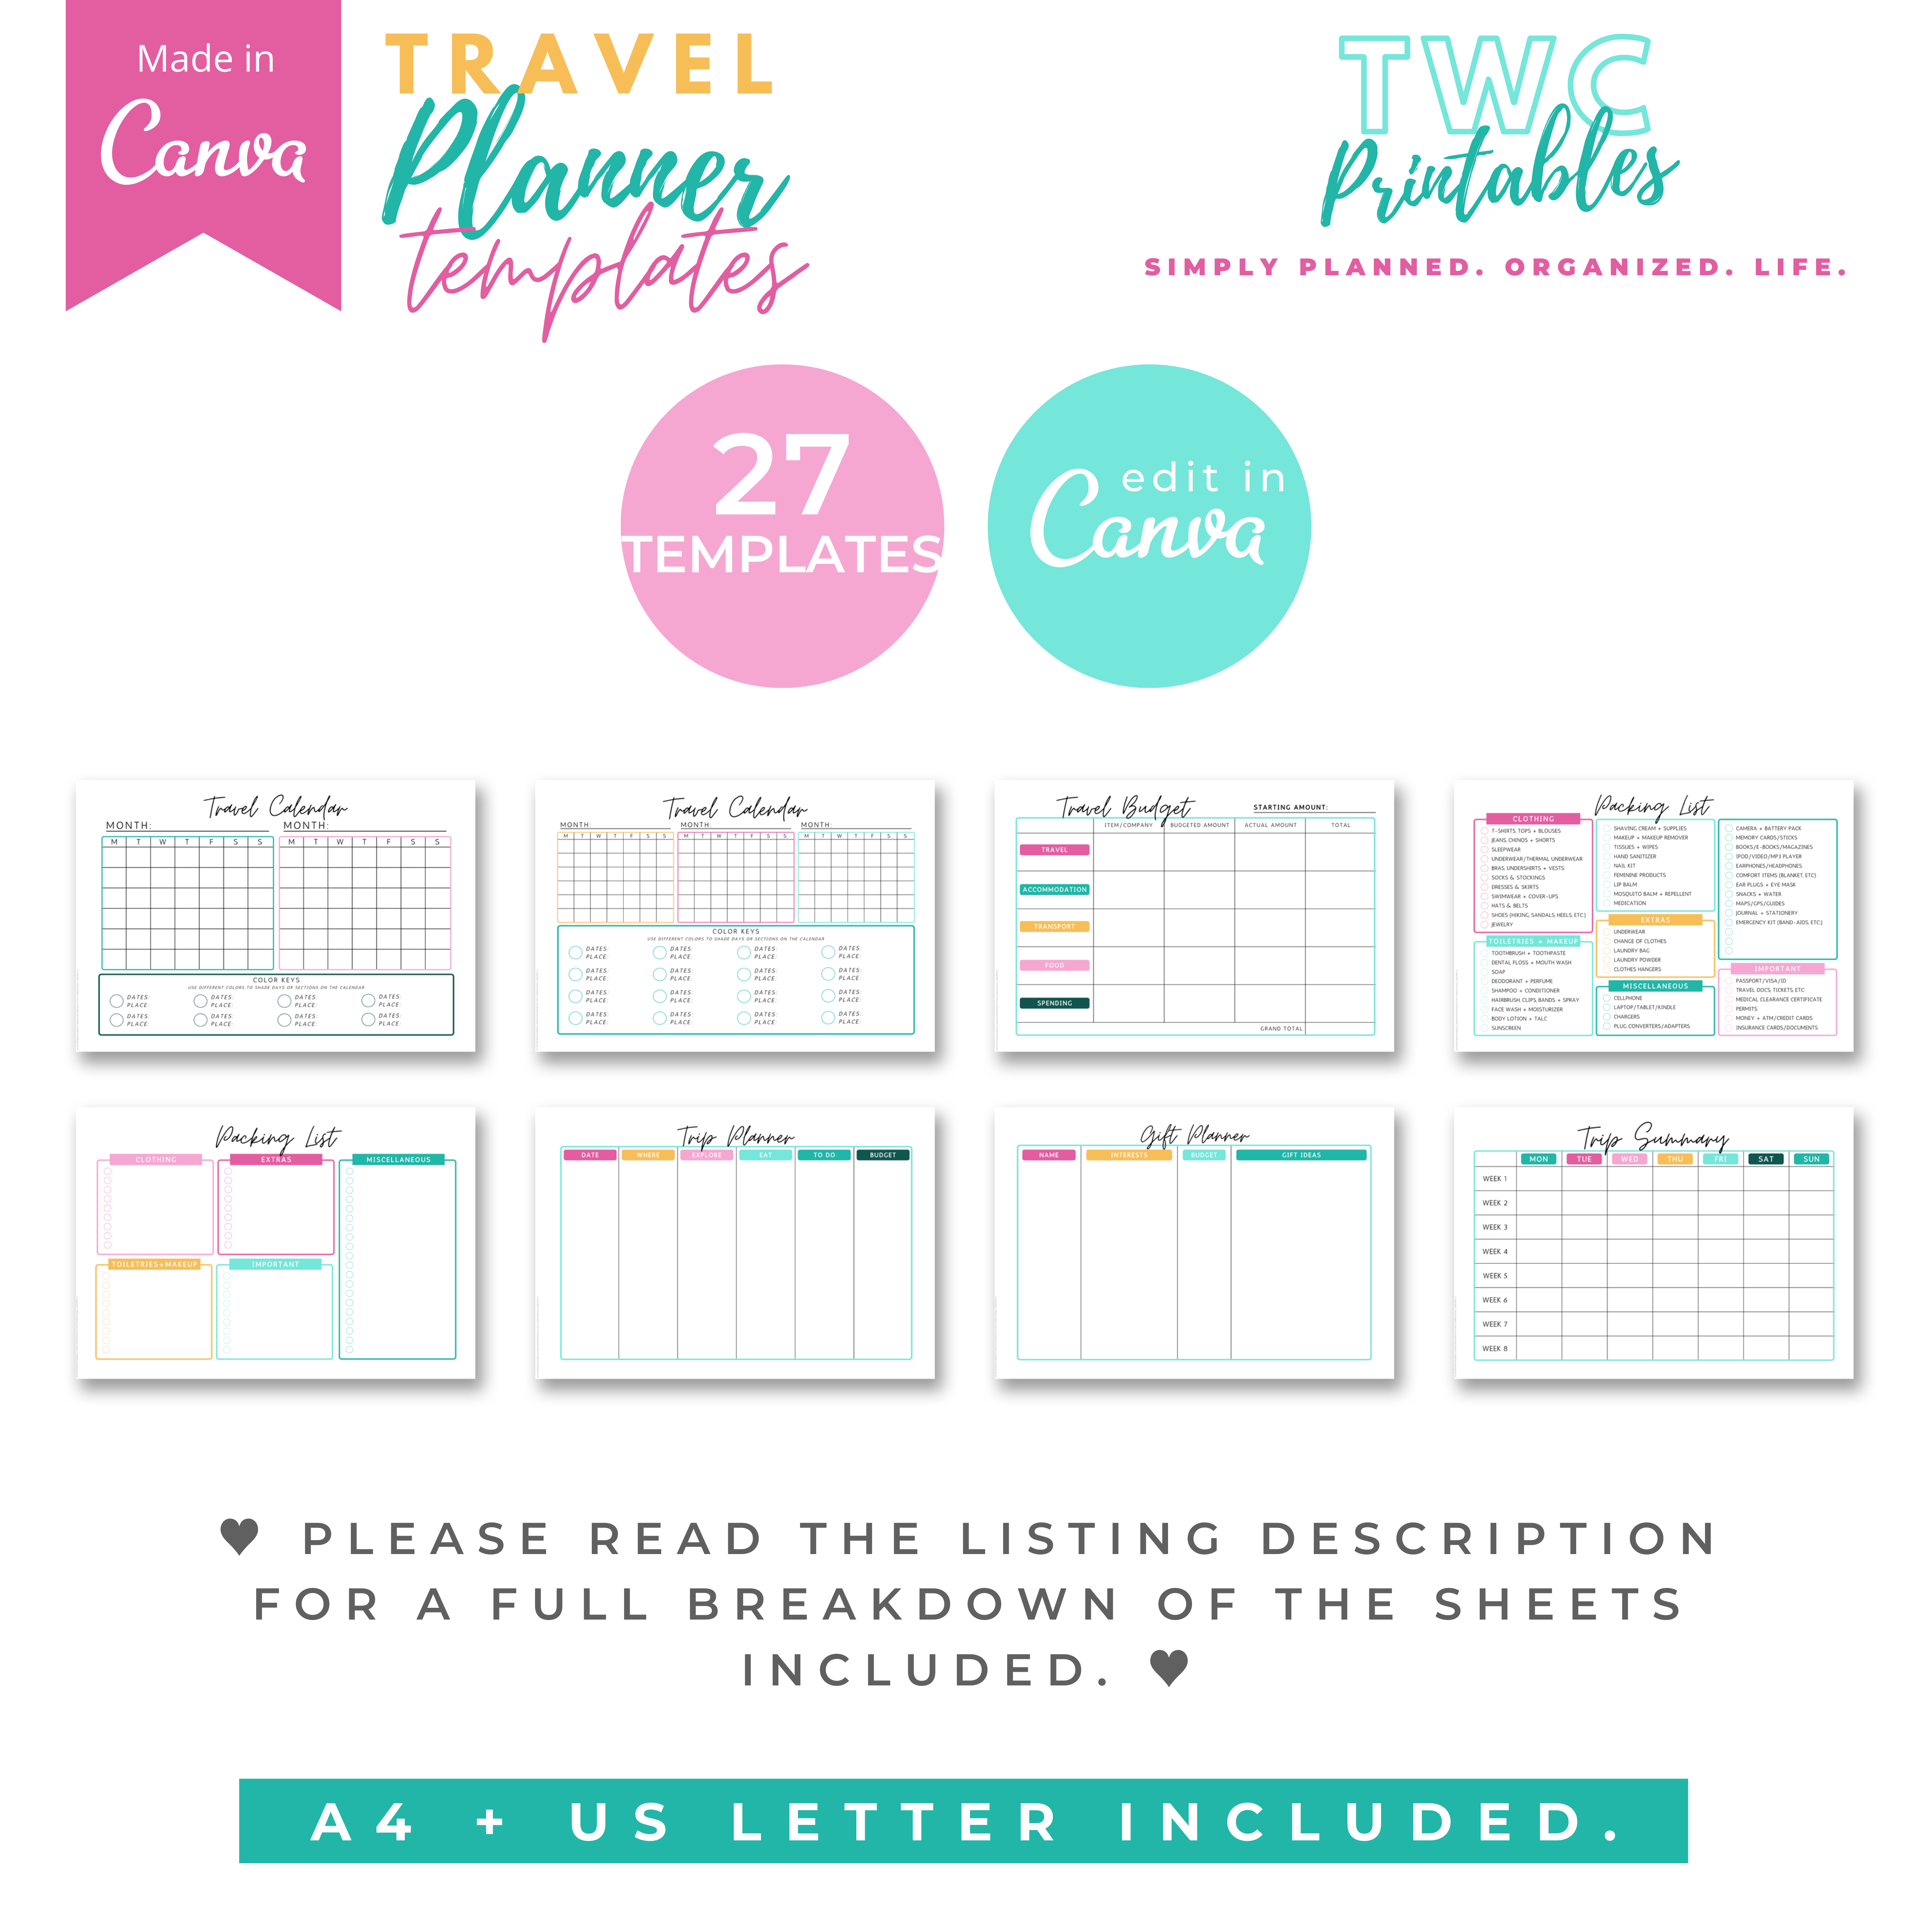 Plan your next epic trip with this editable travel planner template for Canva! Creating planner sheets from scratch takes so much time, and possibly money. These editable planner sheets will make it easier to create the sheets you really need to plan out your trips, budget, checklists and more. Edit these templates with the free version of Canva!